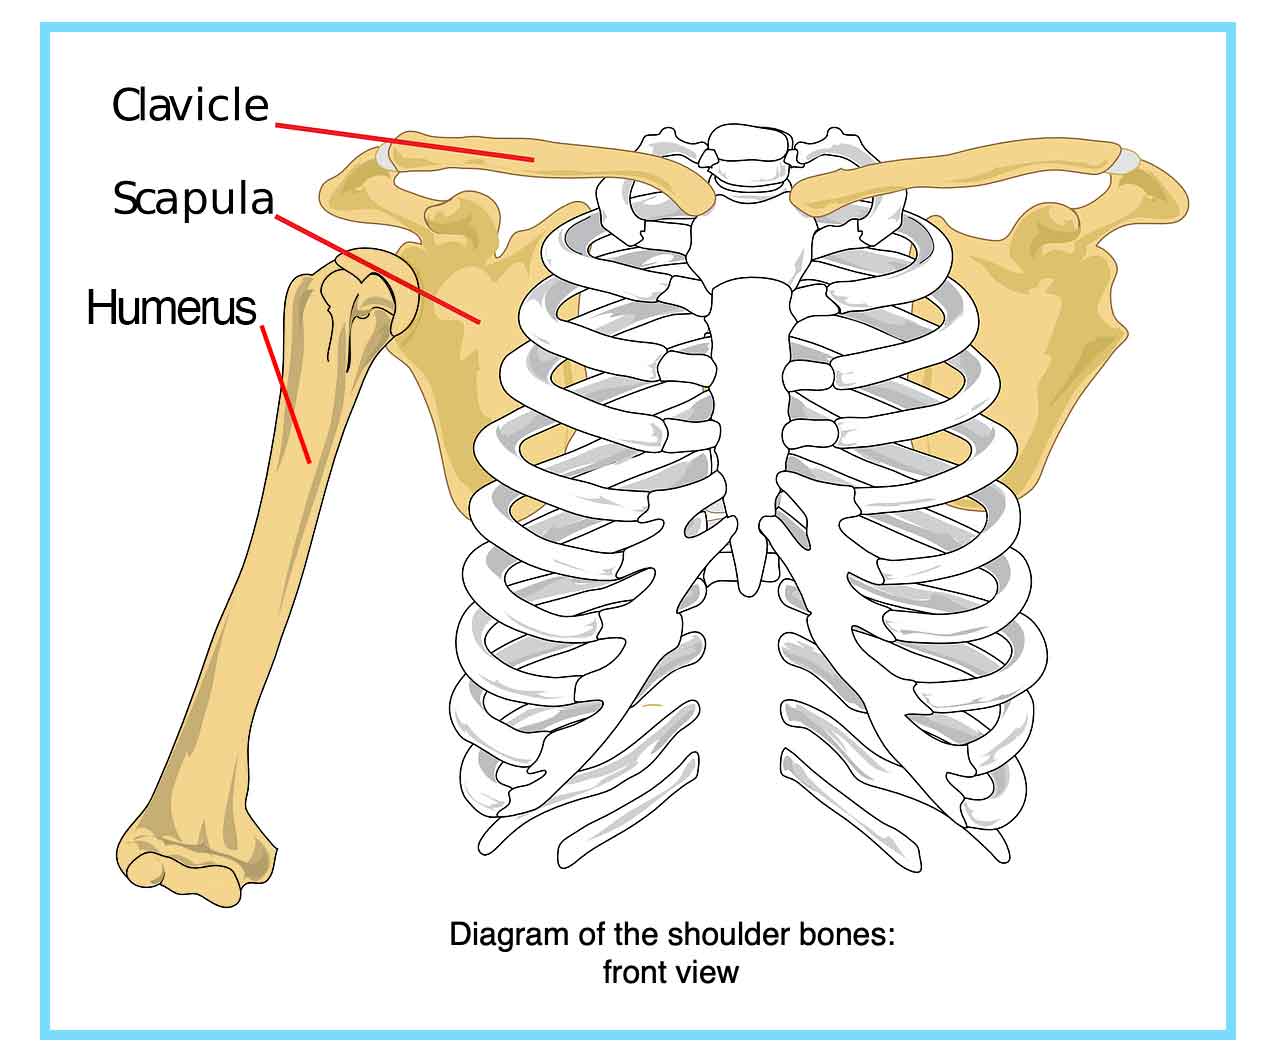 diagram showing placement of shoulder bones that can be affected by lifting heavy weights